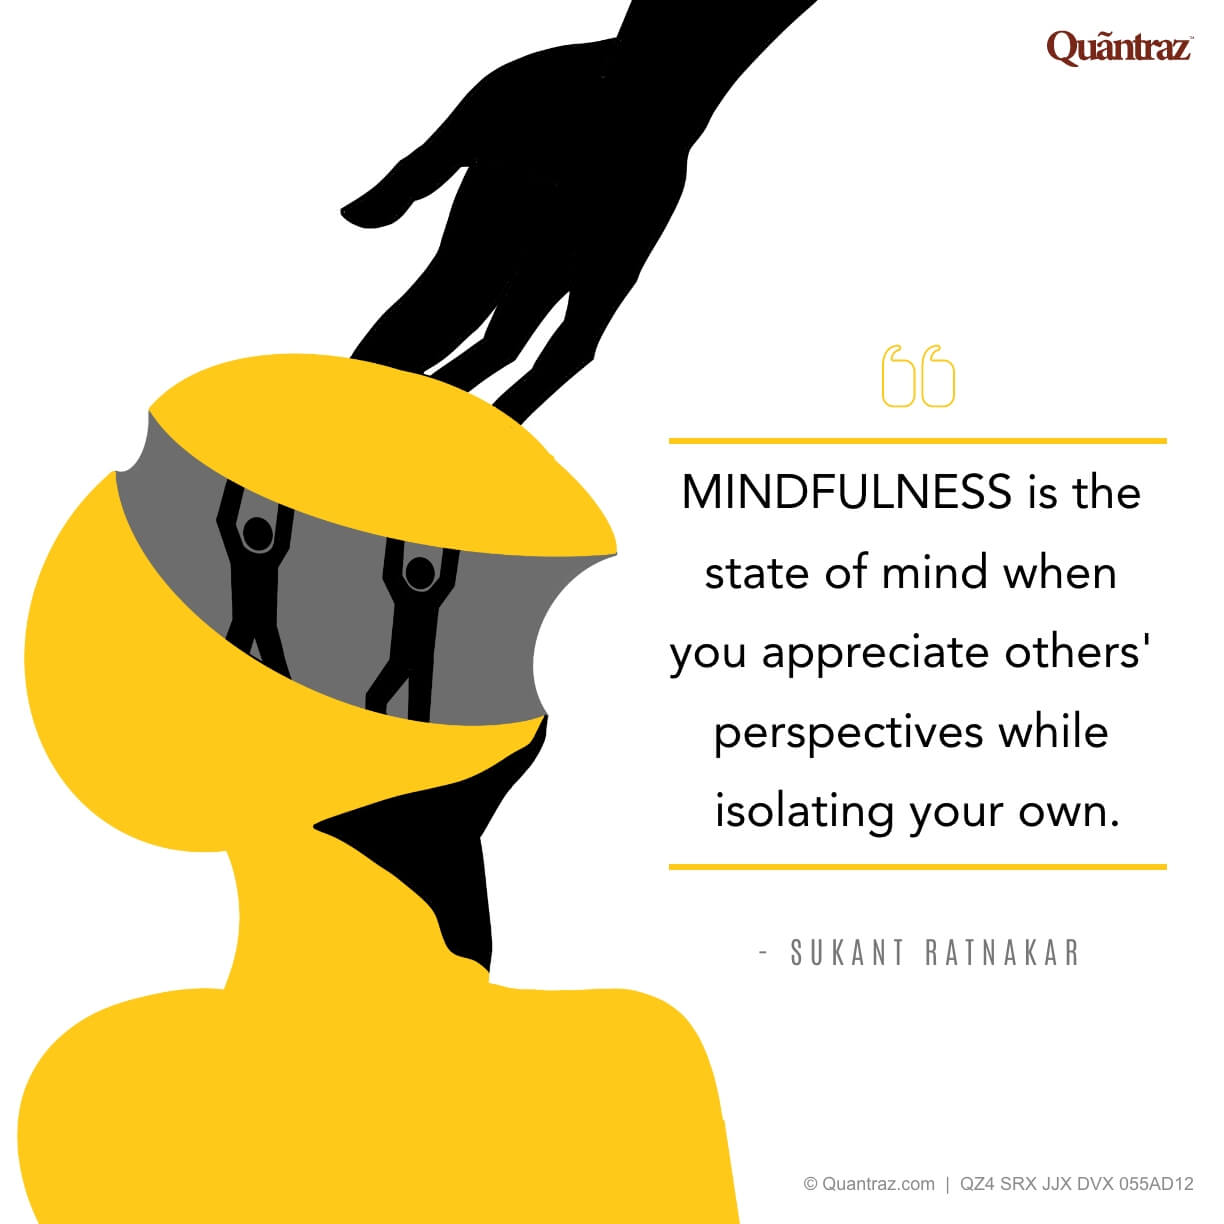 Mindfulness is the